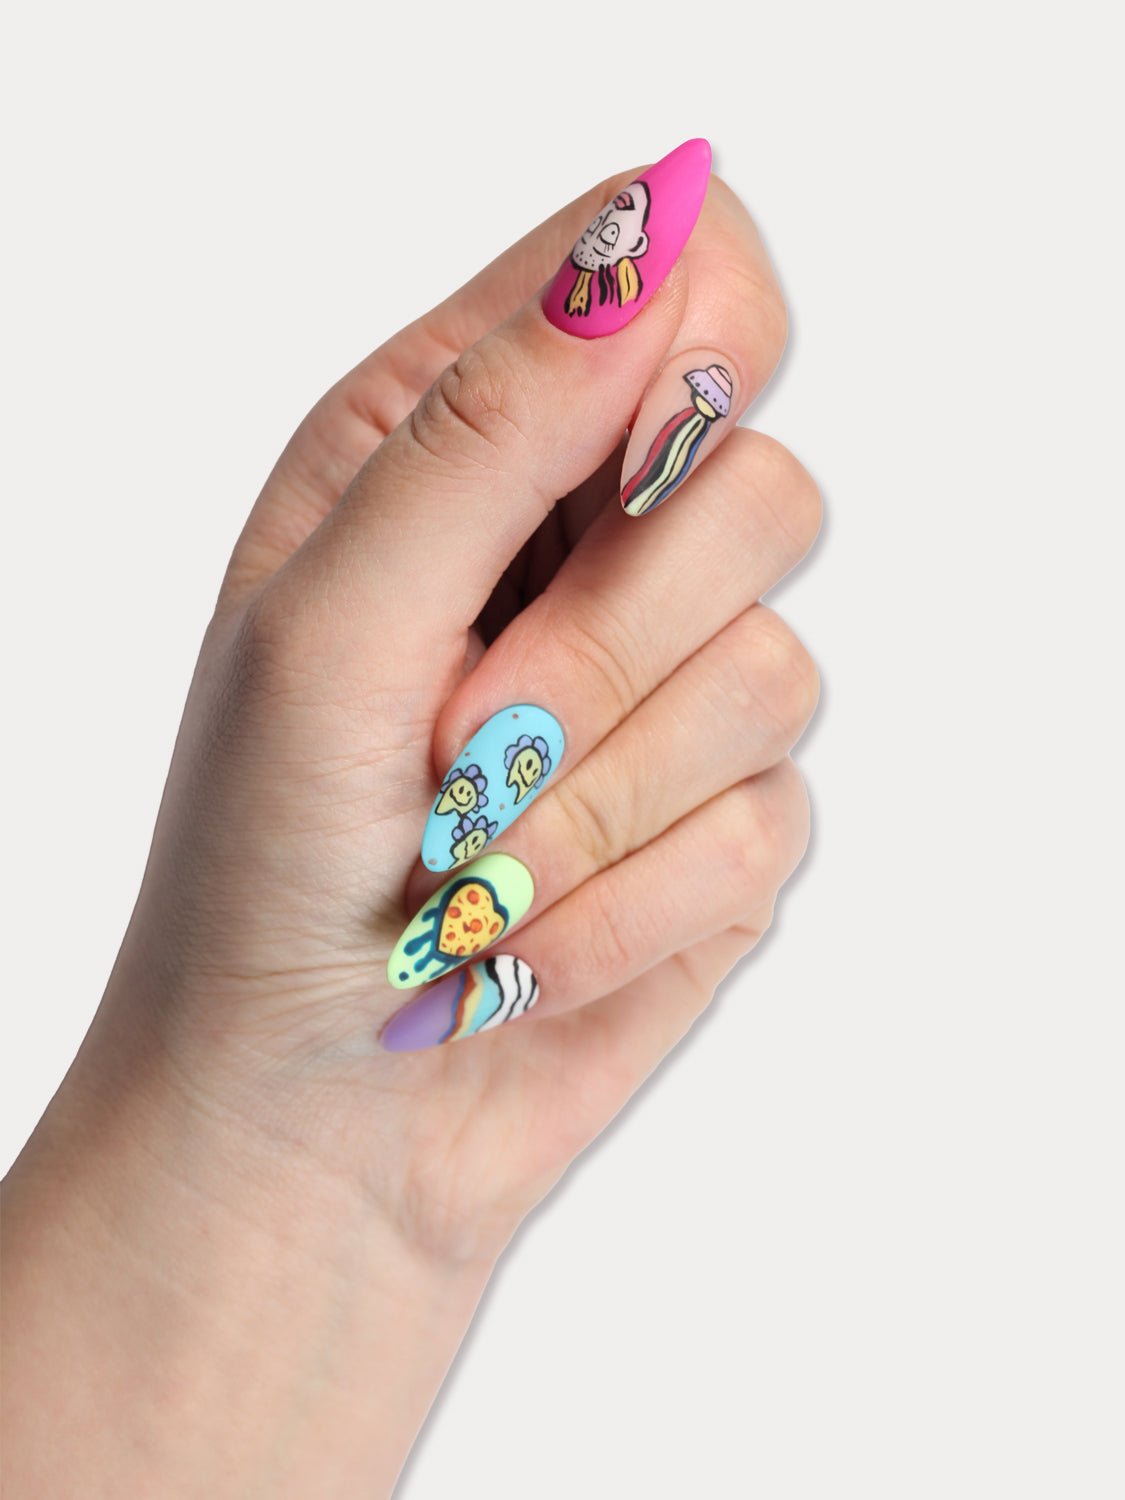 MIEAP Colorful Graffiti press-on nail set showcases a vibrant array of bright fluorescent colors formulated by our designers. The hand-painted patterns draw inspiration from street art graffiti, perfectly complementing the vibrant base colors. #MIEAP #MIEAPnails #pressonnail #falsenail #acrylicnail #nails #nailart #naildesign #nailinspo #handmadenail #summernail #nail2023 #graduationnail #almondnail #colorfulnail  #datingnail #promnail